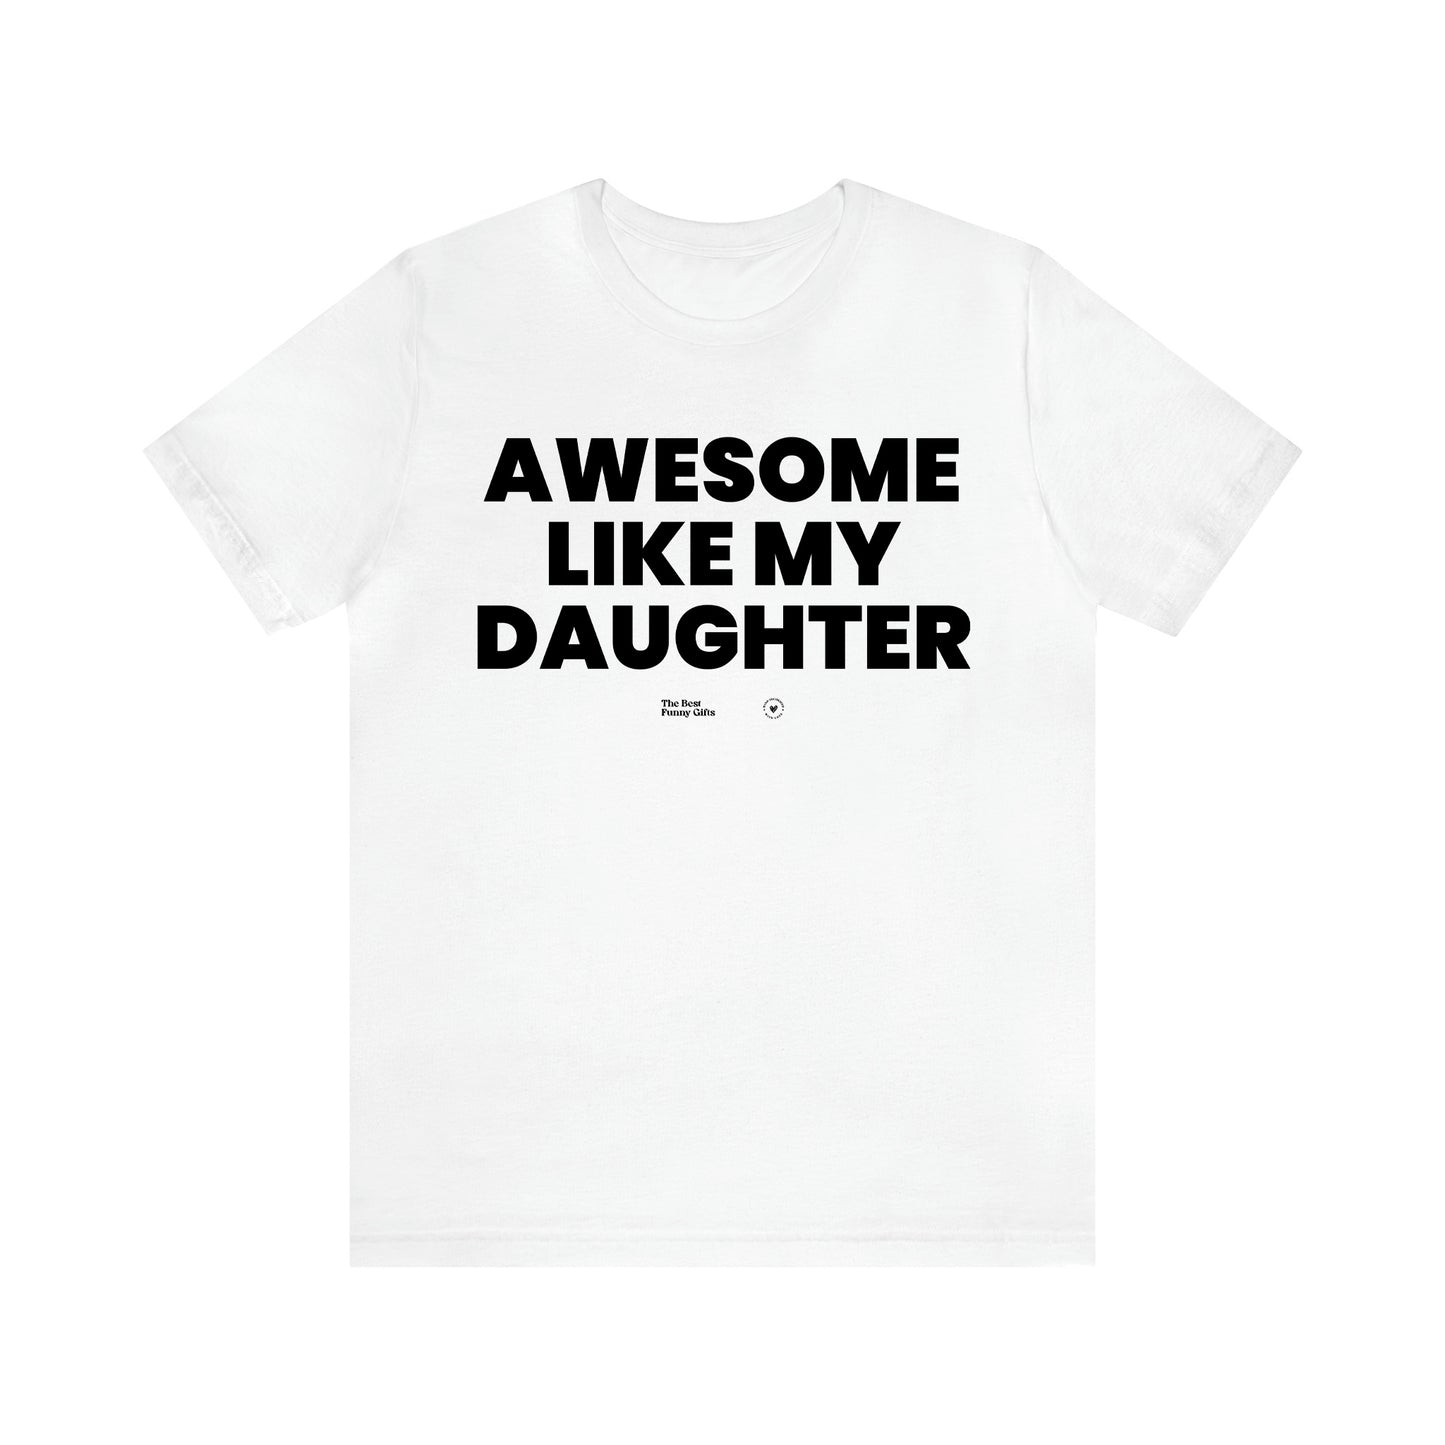 Men's T Shirts Awesome Like My Daughter - The Best Funny Gifts